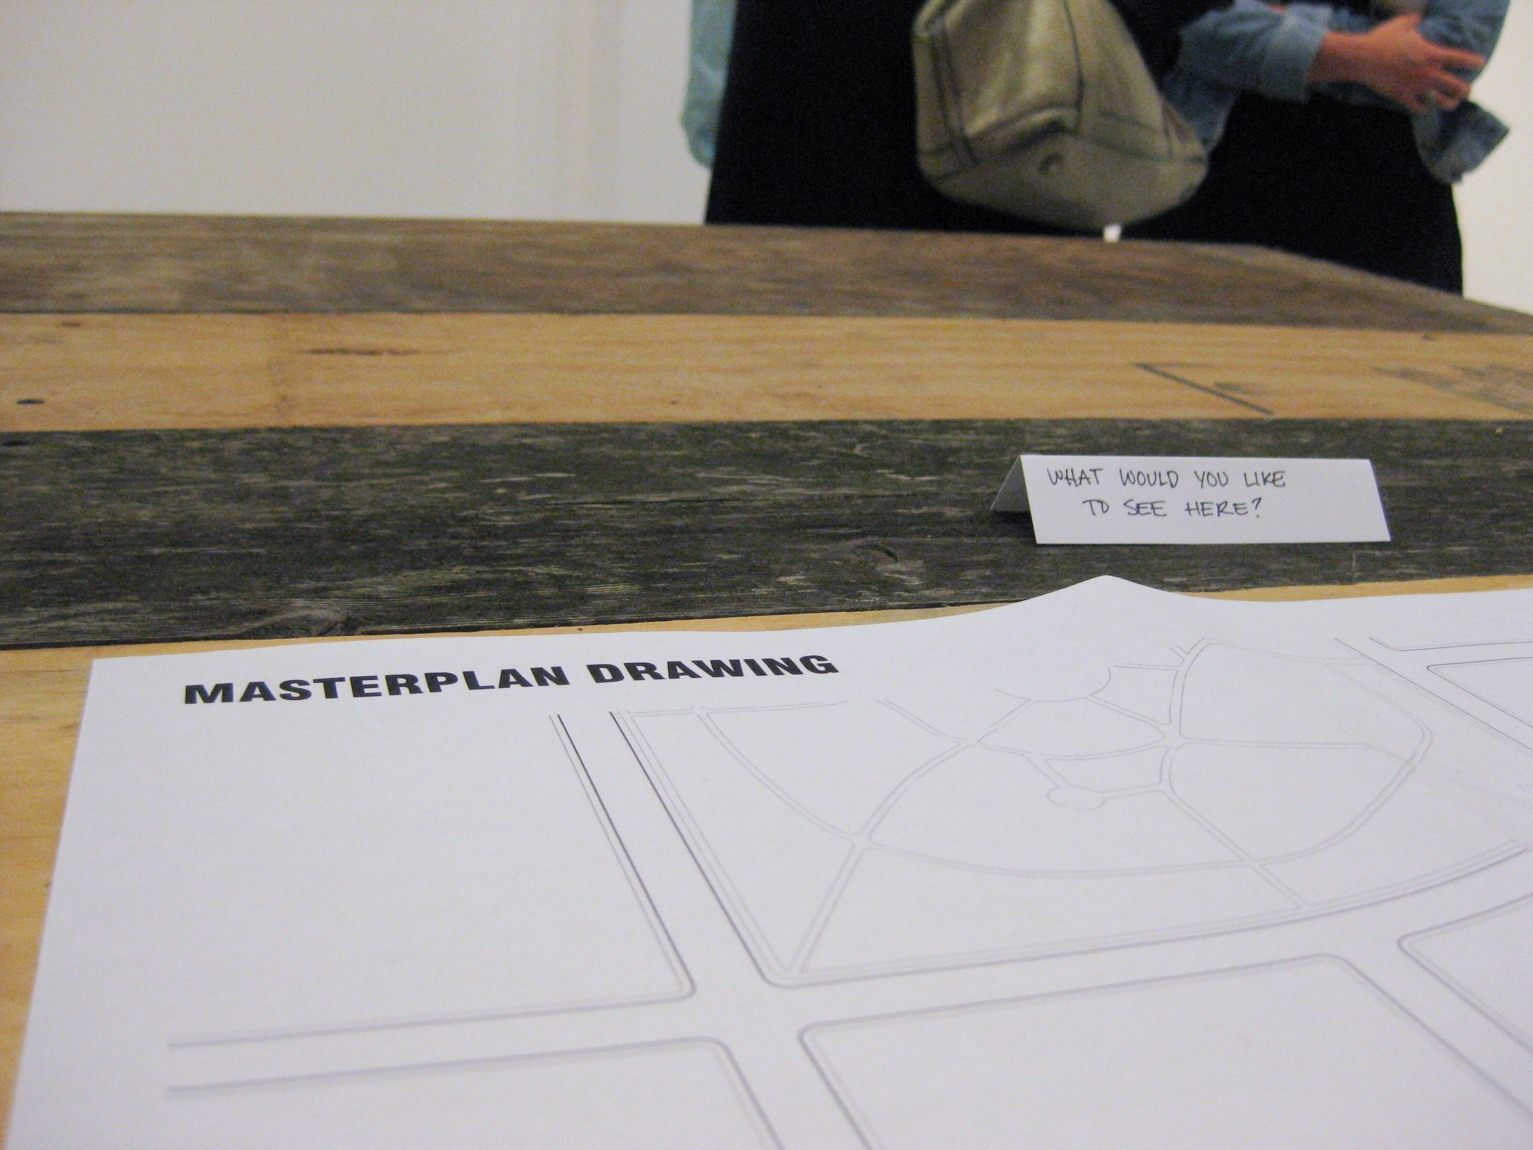 A closeup of a page that reads "MASTERPLAN DRAWING" and a small sign that reads "what would you like to see here?" lying on a wooden table.